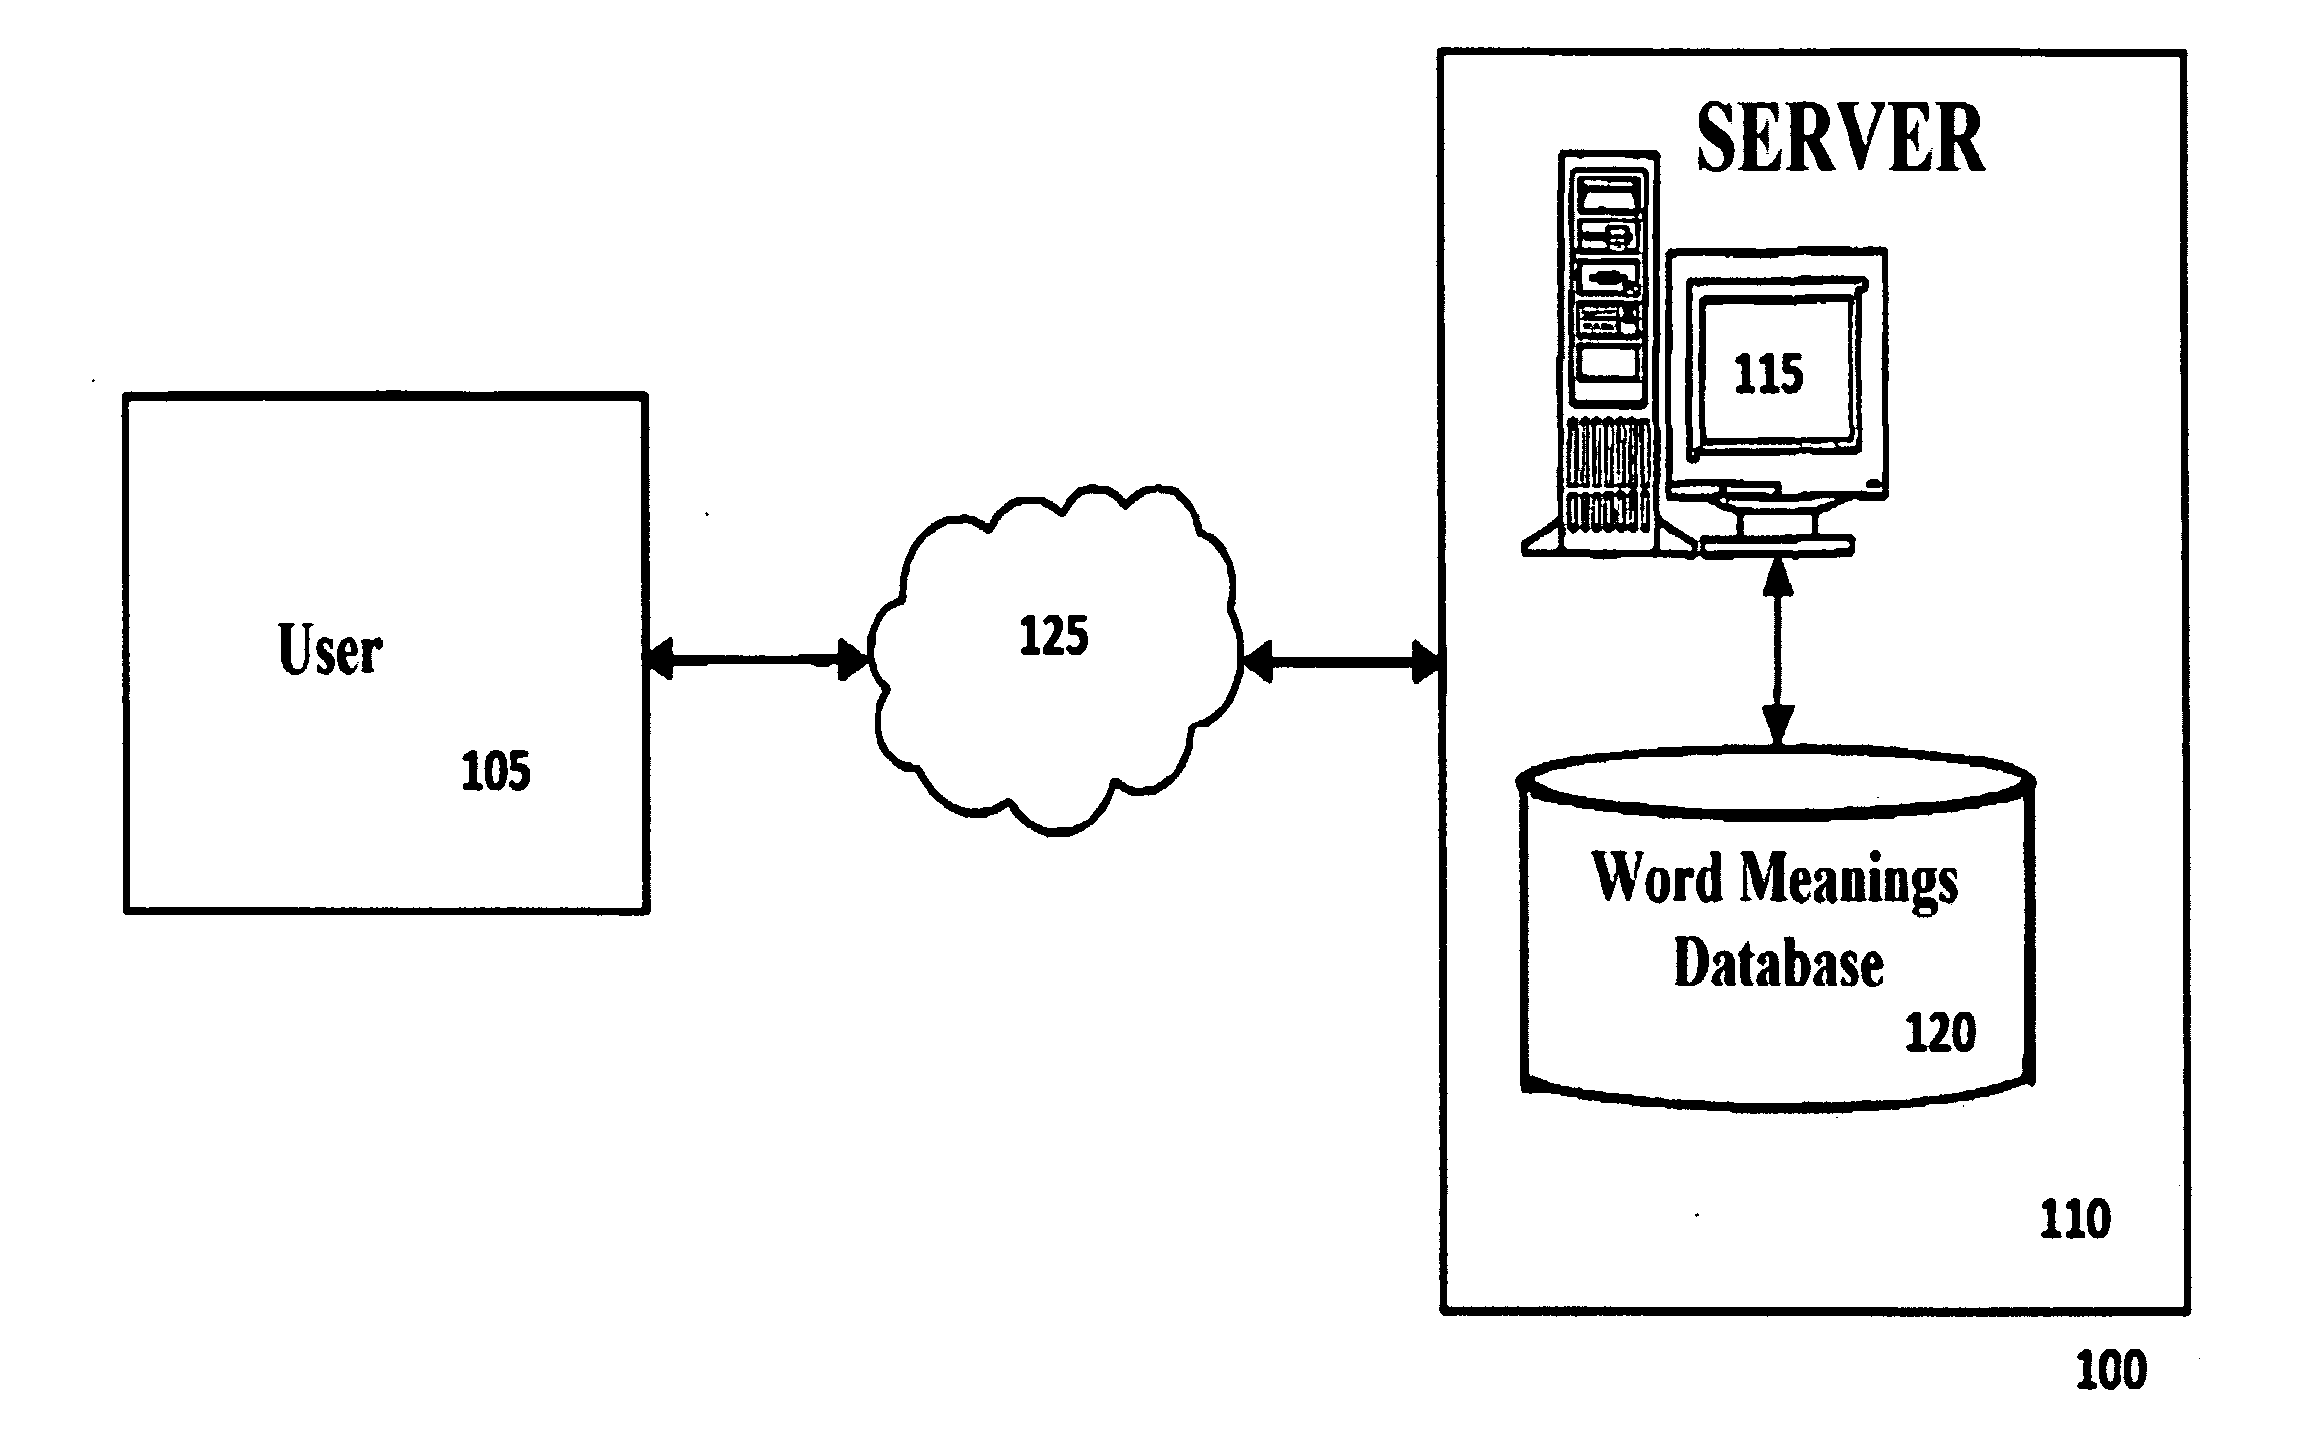 System and Method for Automatically Classifying Text using Discourse Analysis